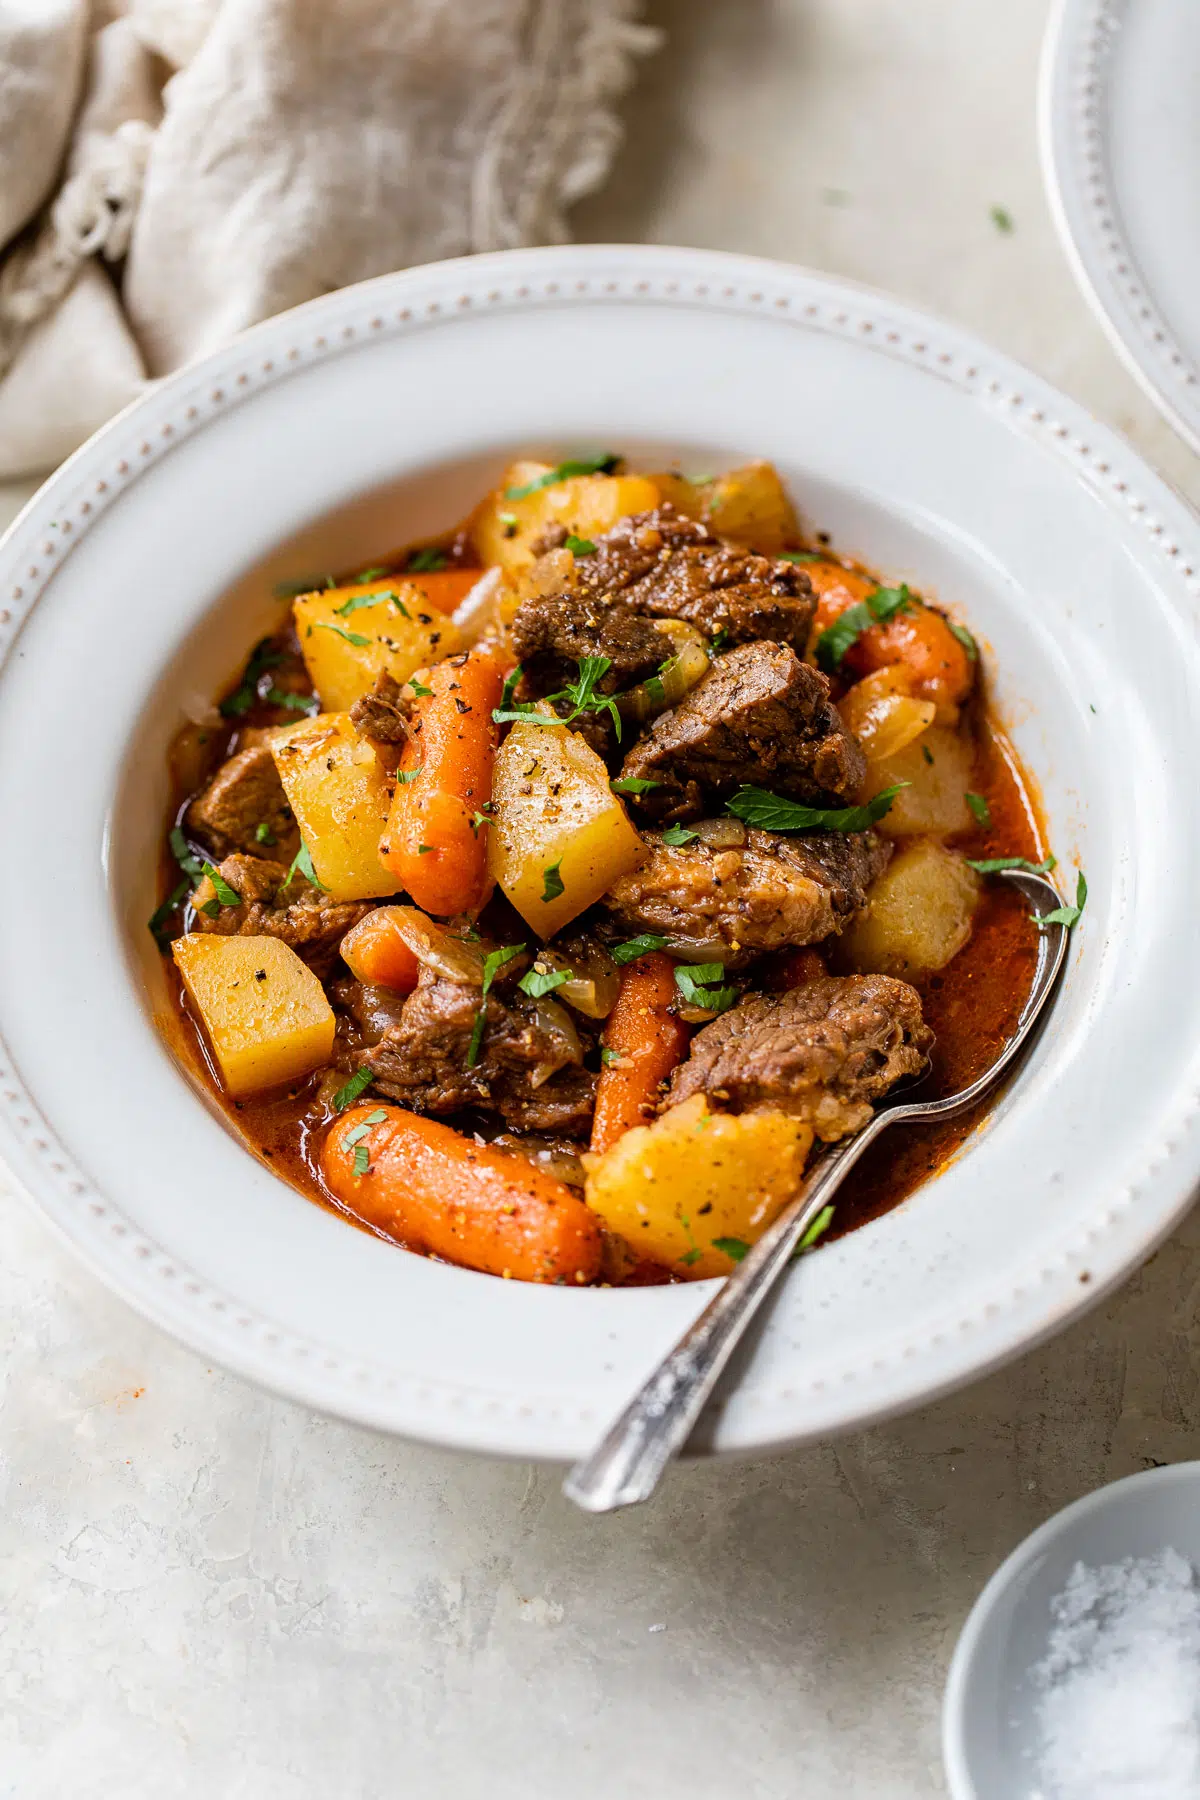 a bowl of stew with beef, carrots and potatoes